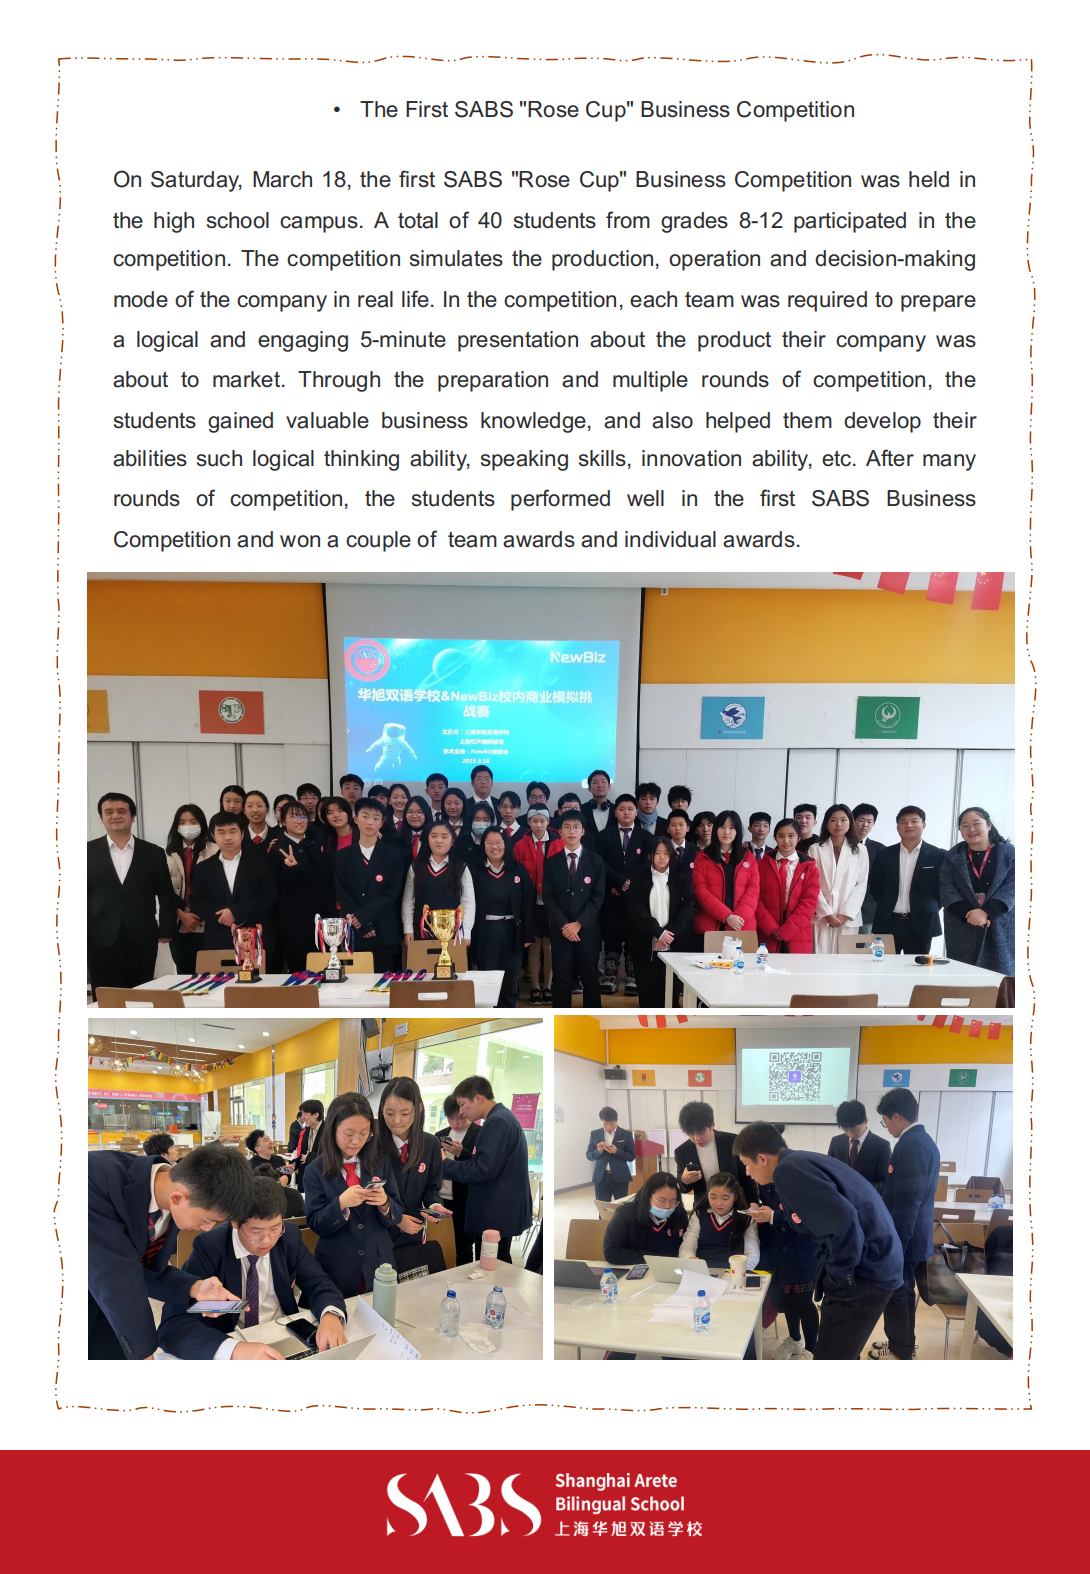 HS 3rd Issue Newsletter pptx（English）_18.png